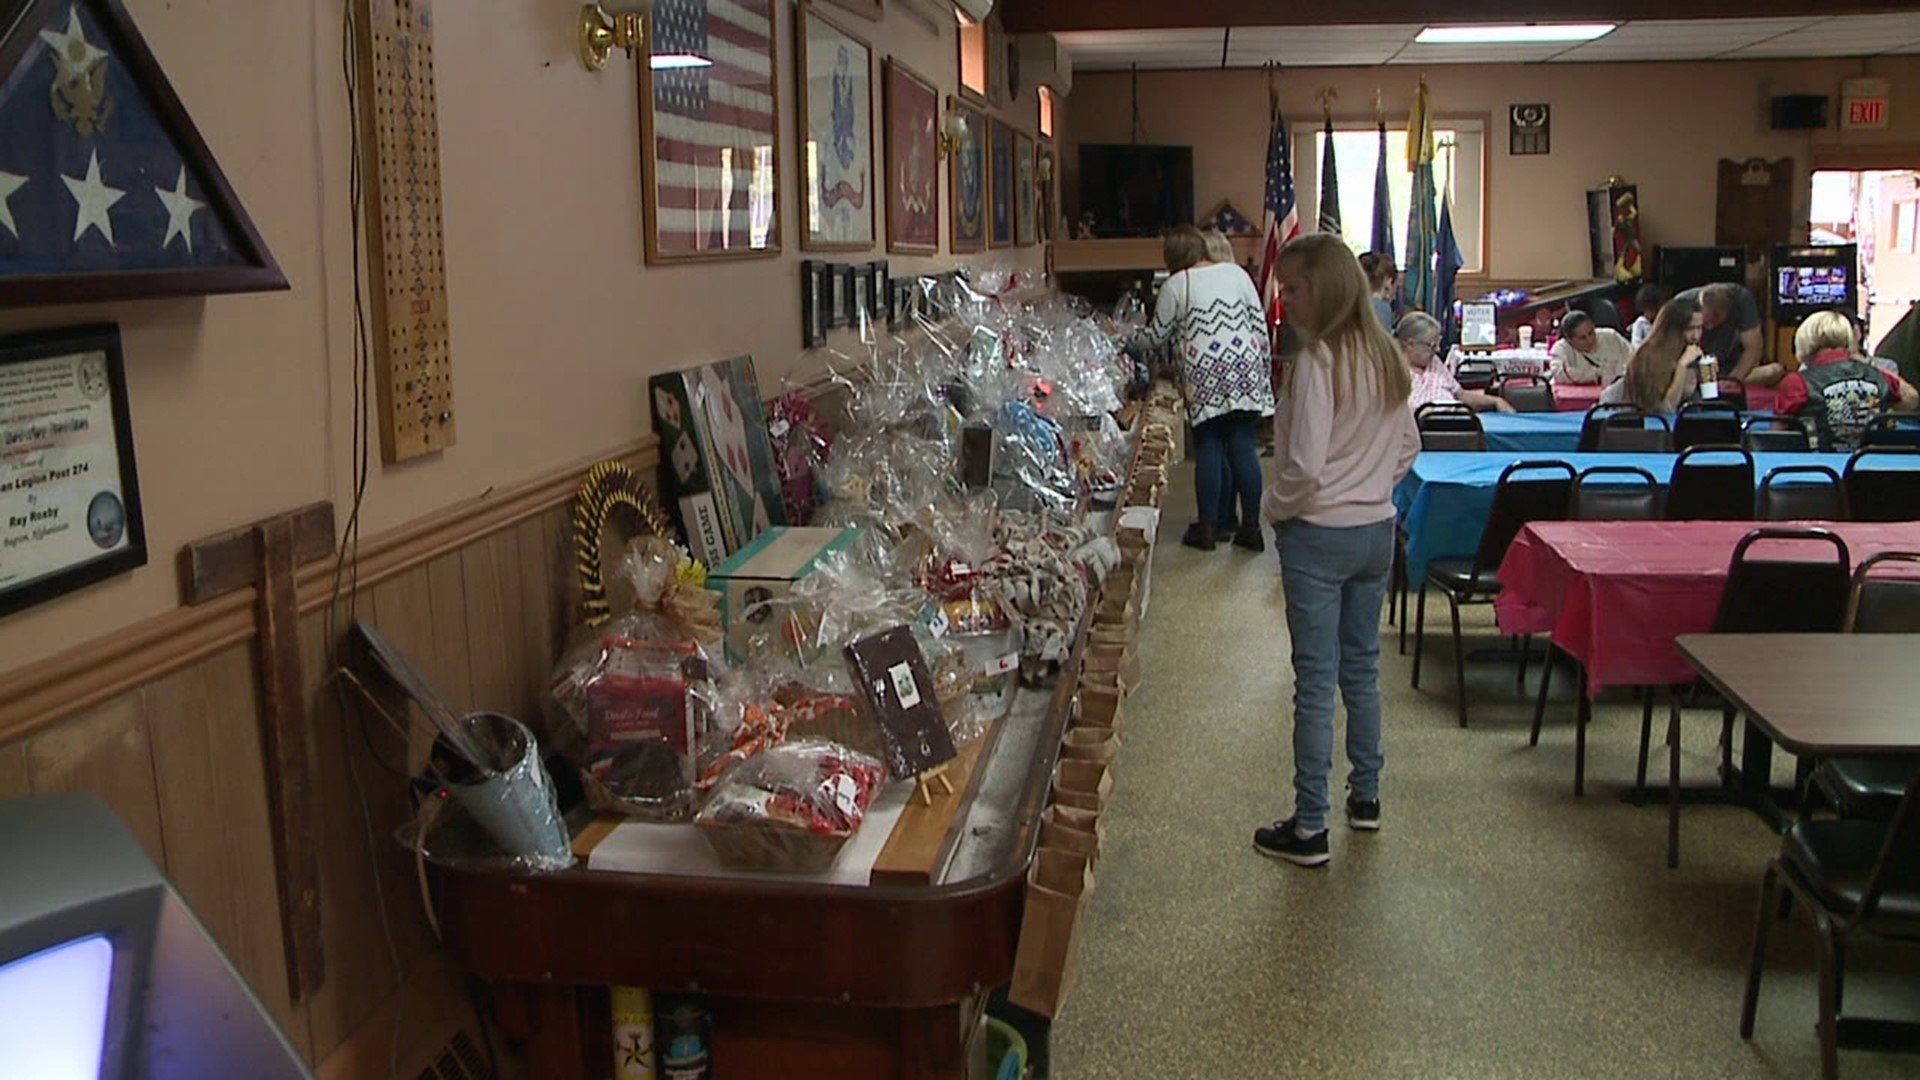 The fundraiser was held for Dave Genovese at American Legion Post 274 in Gouldsboro.